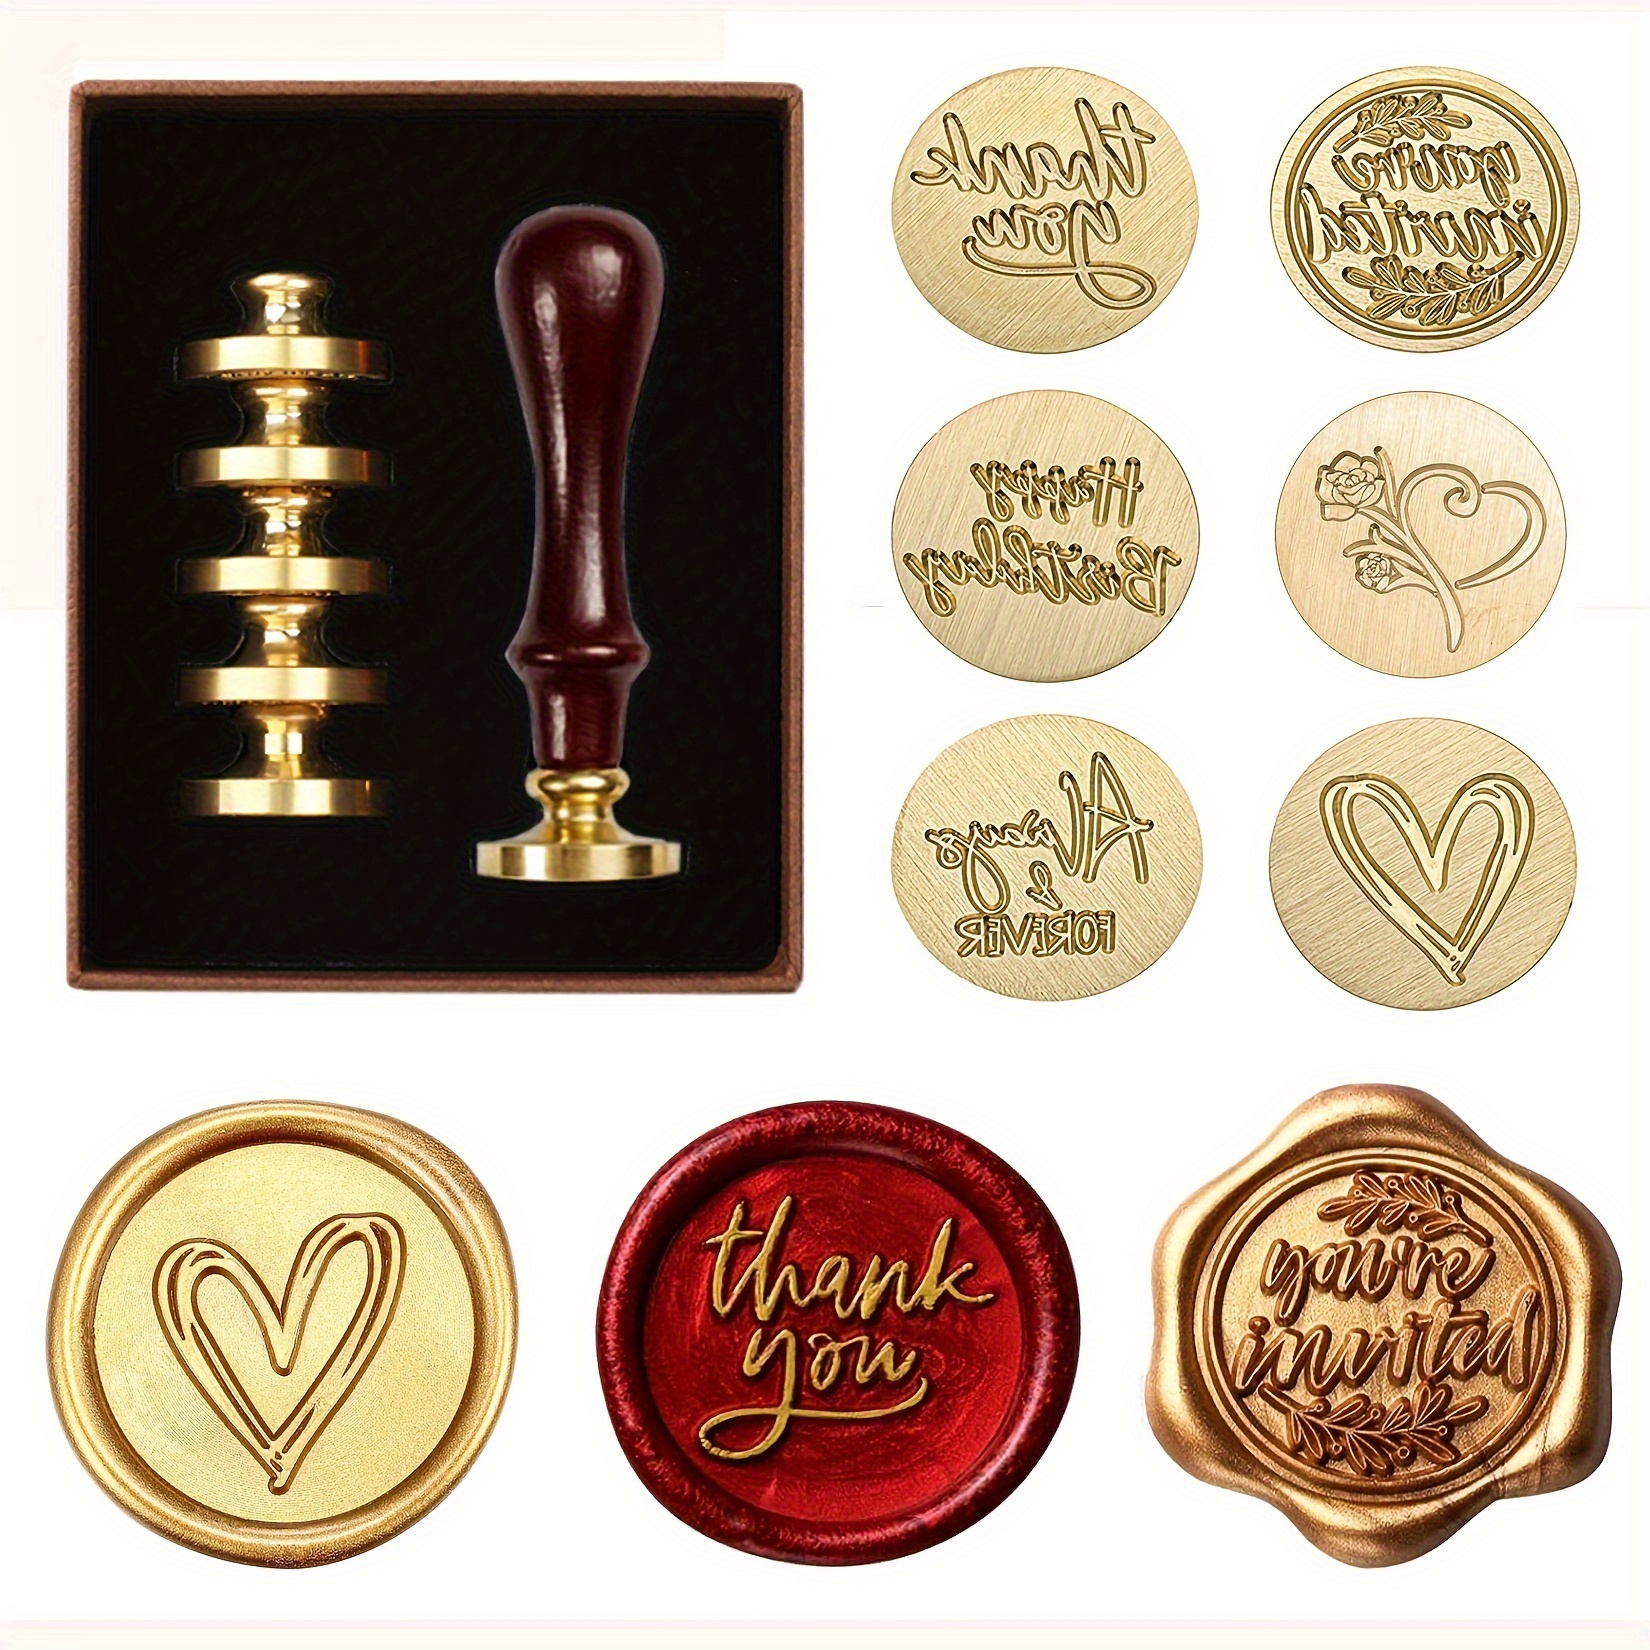 

Elegant 6-piece Wax Seal Stamp Kit With Interchangeable Brass Heads & Wooden Handle - Perfect For Wedding Invitations, Gift Wrapping & Thank You Notes